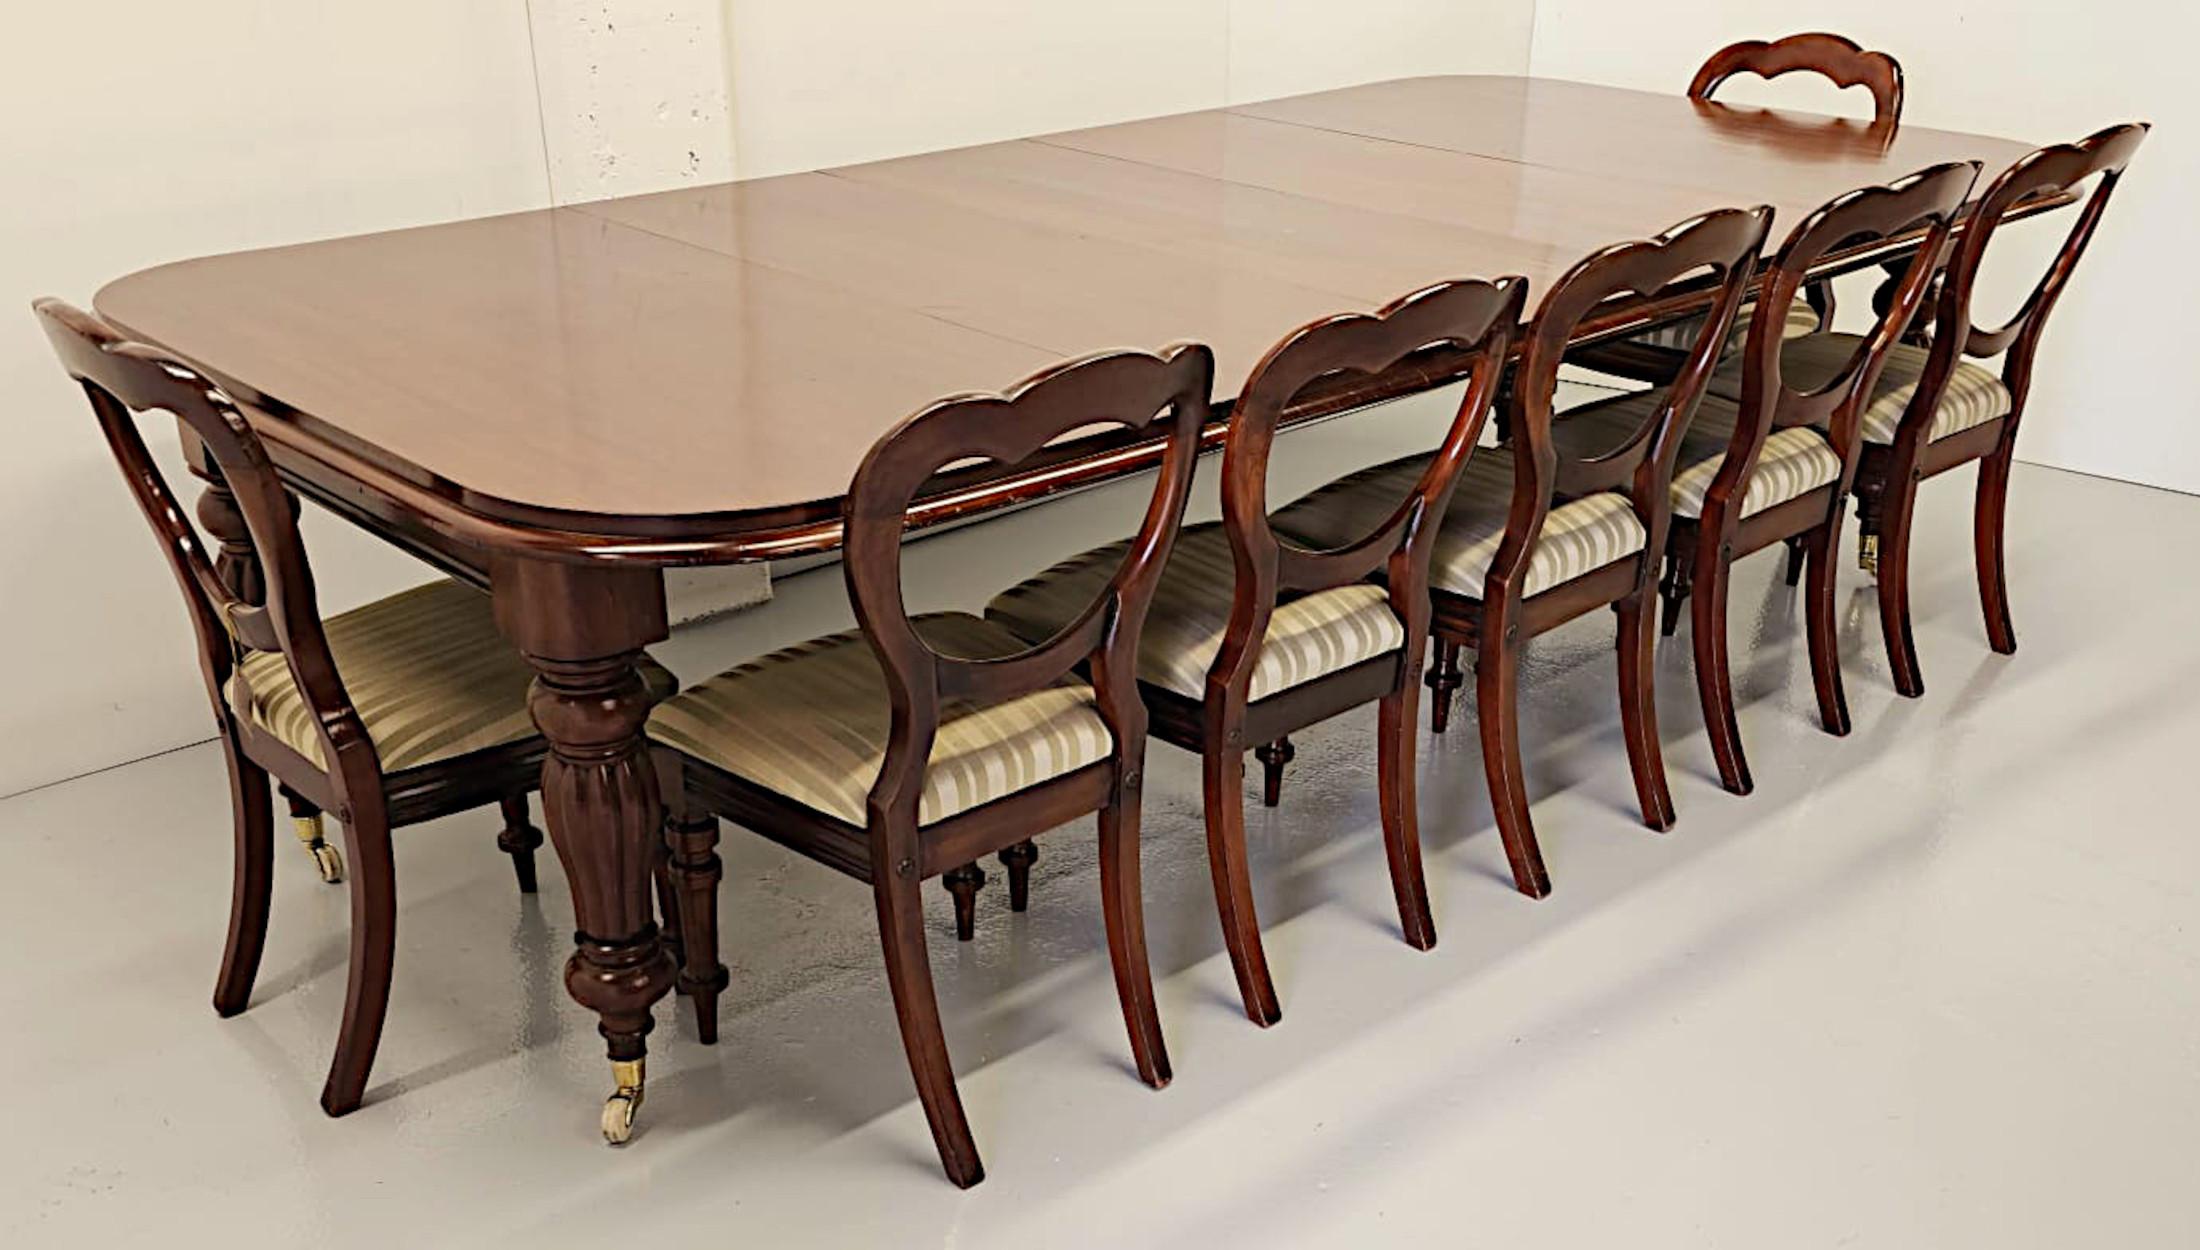 A  Fine 19th Century mahogany extendable dining table, stunningly hand carved with beautifully rich patination and grain.  This fabulous piece is of superb quality, in original condition, has three leaves and extends comfortably to seat up to twelve